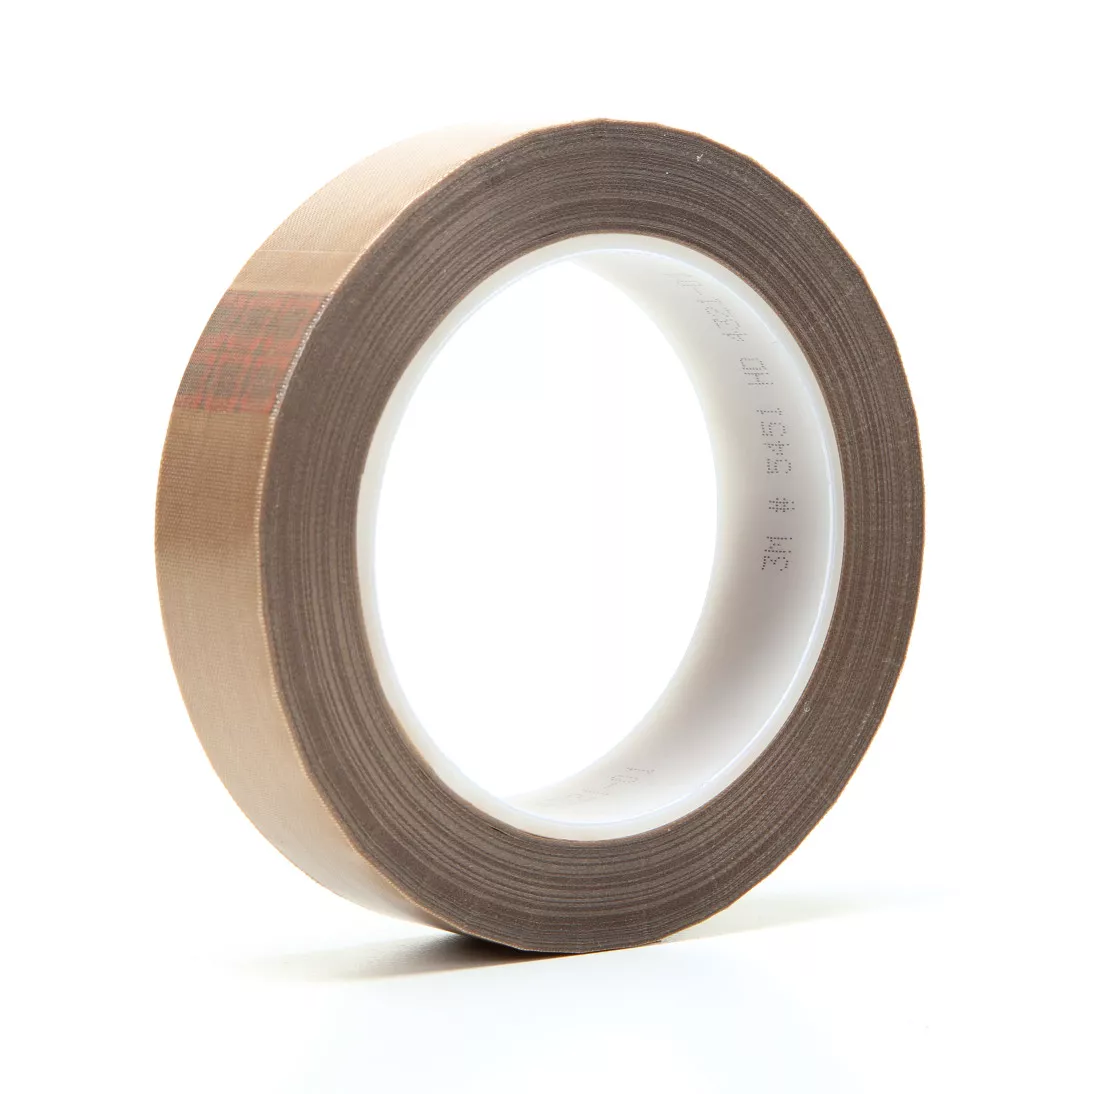 3M™ PTFE Glass Cloth Tape 5451, Brown, 1 in x 36 yd, 5.6 mil, 9 rolls
per case, Boxed